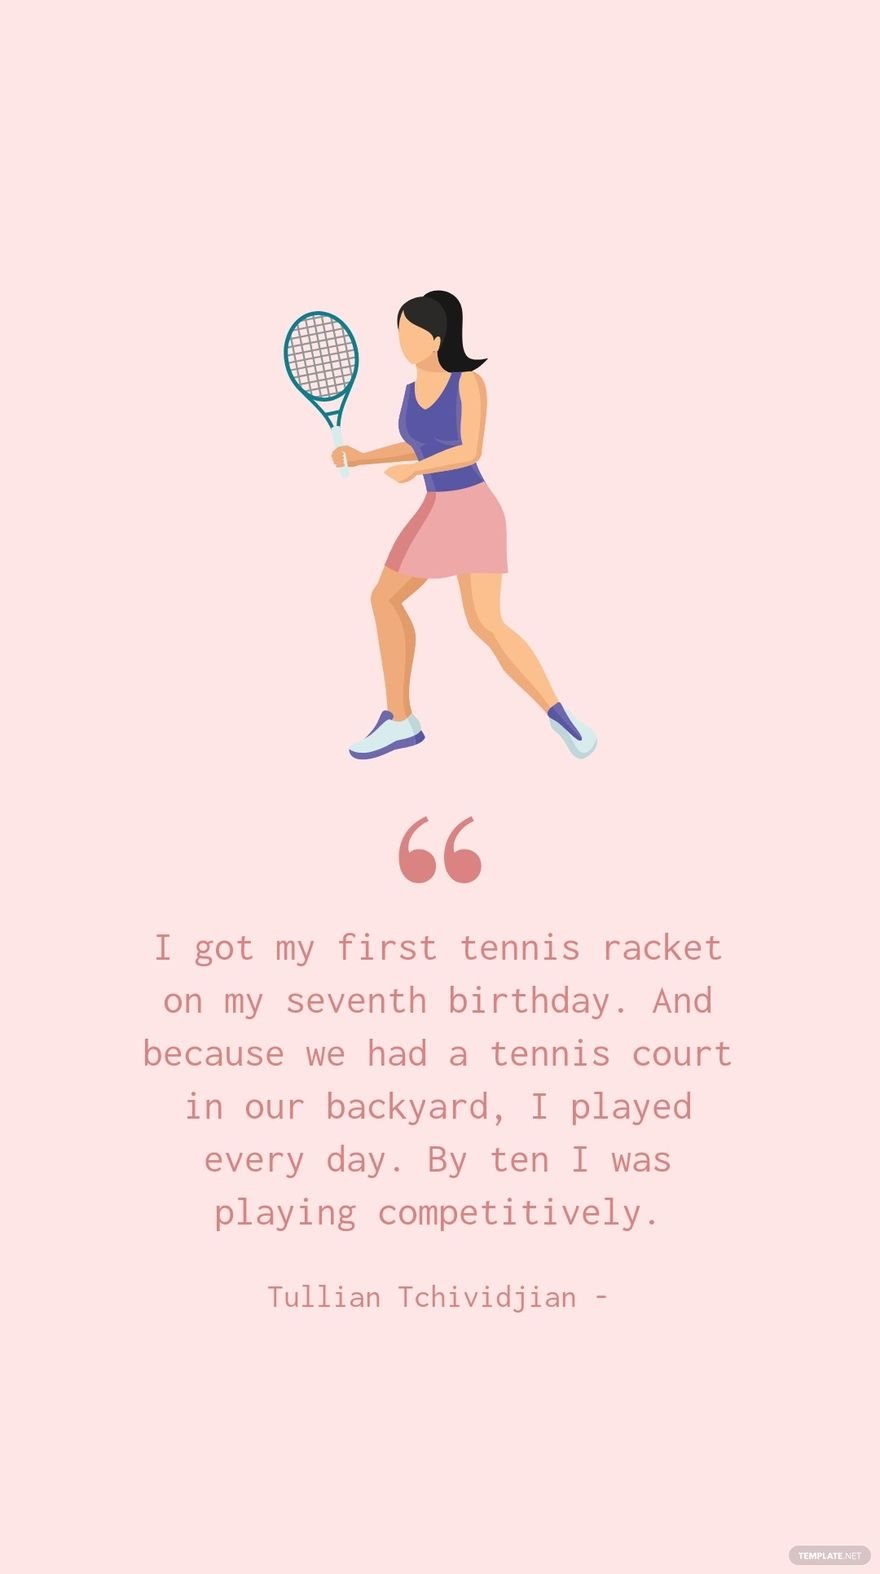 Free Tullian Tchividjian - I got my first tennis racket on my seventh birthday. And because we had a tennis court in our backyard, I played every day. By ten I was playing competitively. in JPG